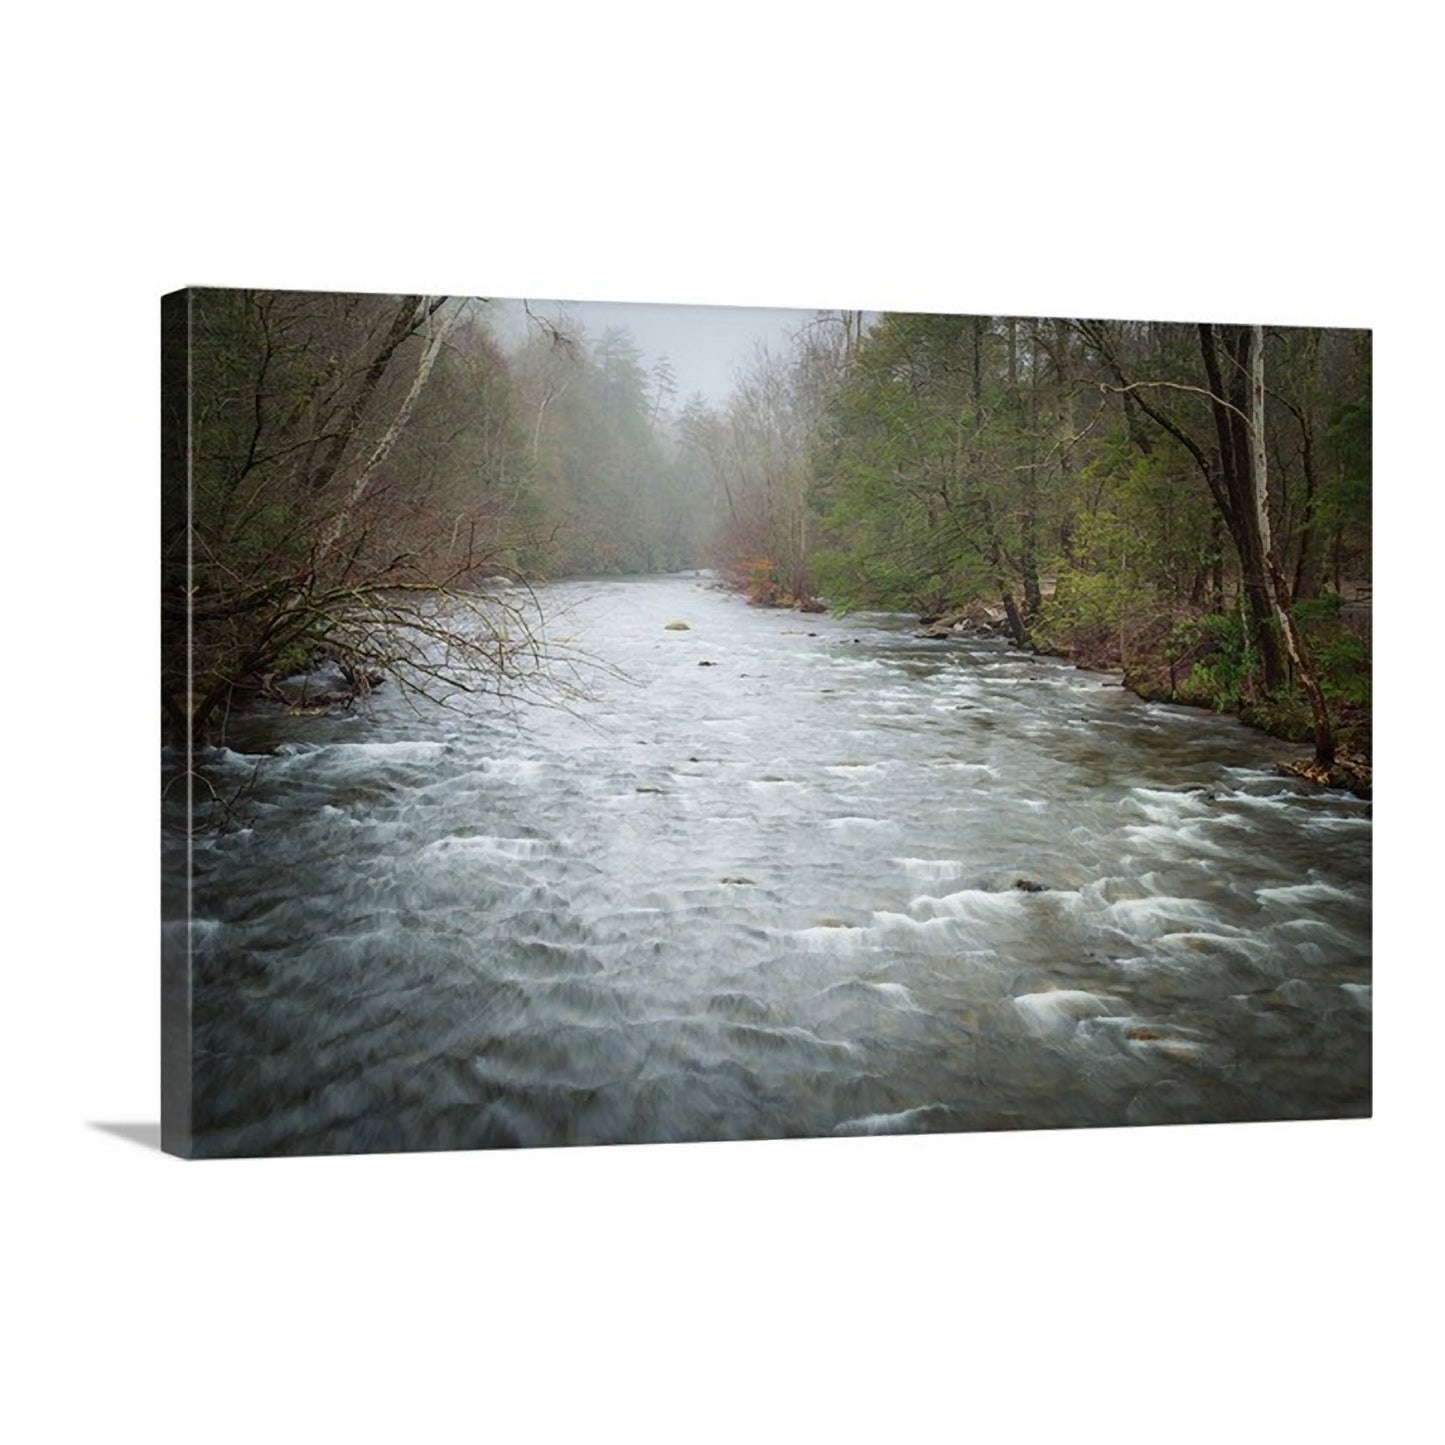 Canvas art showing the quiet beauty of the Smoky Mountains and the Little River.